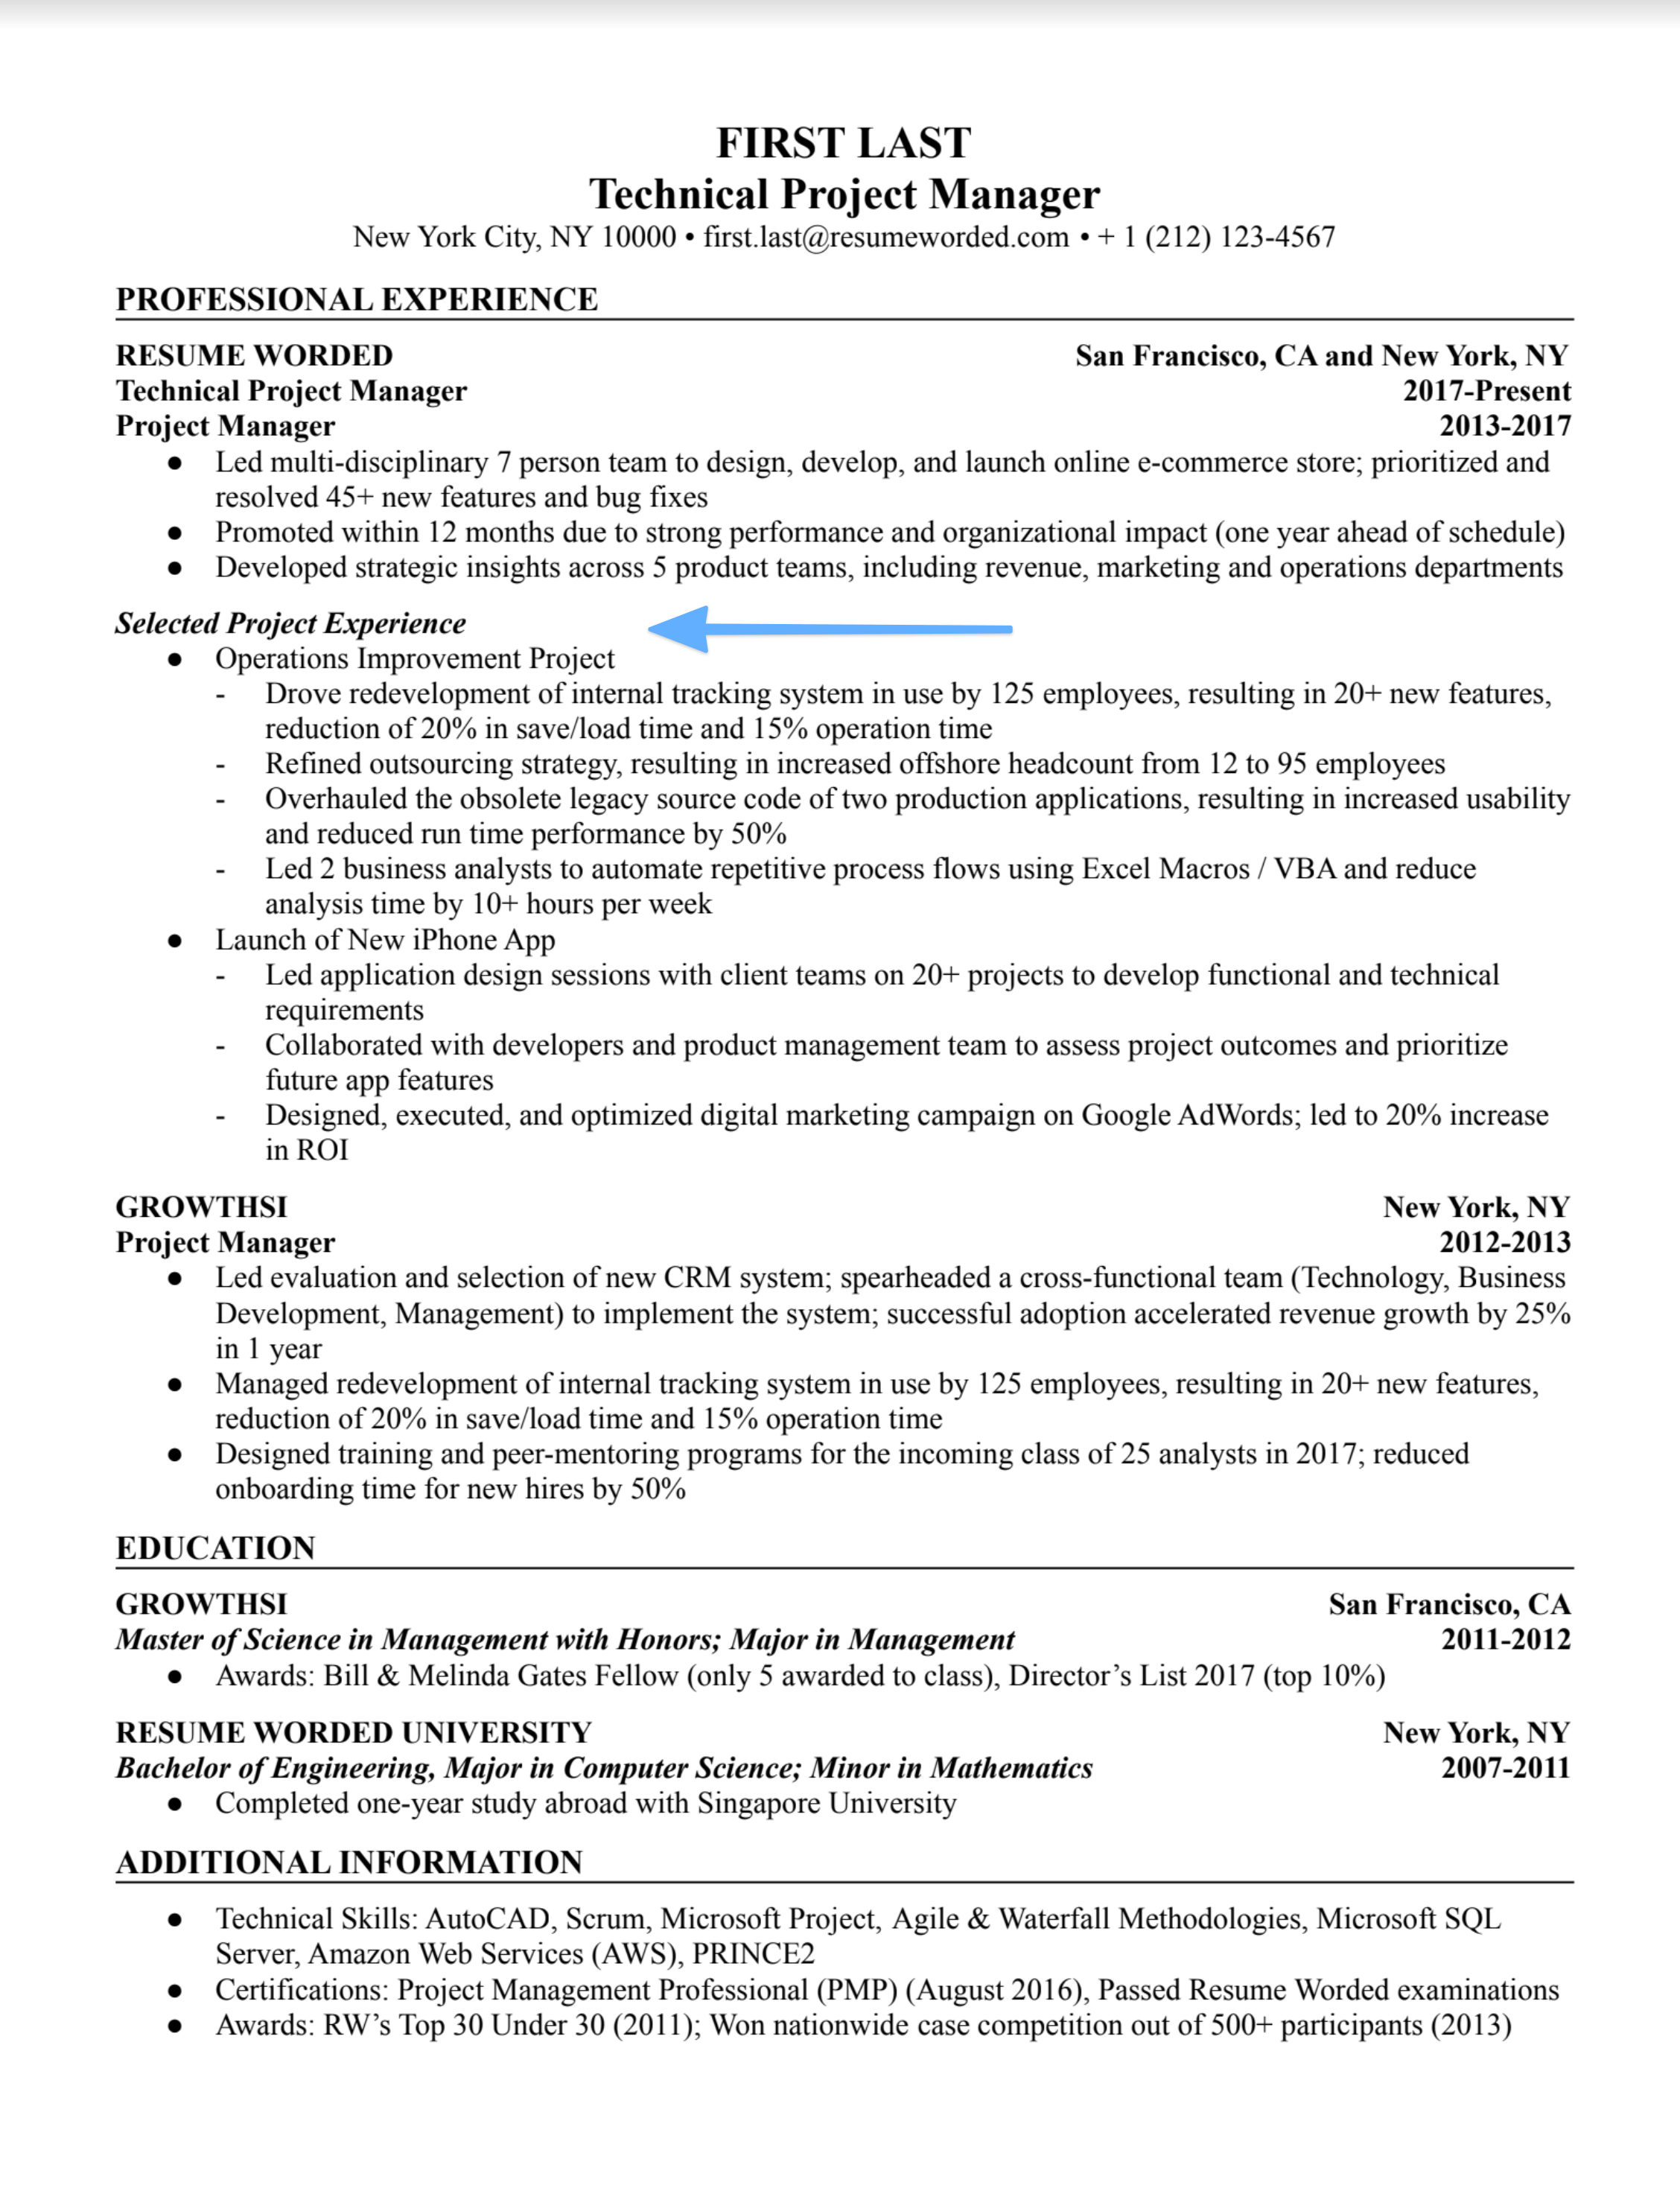 Technical project manager resume with relevant work history, detailed bullet points, and measurable accomplishments